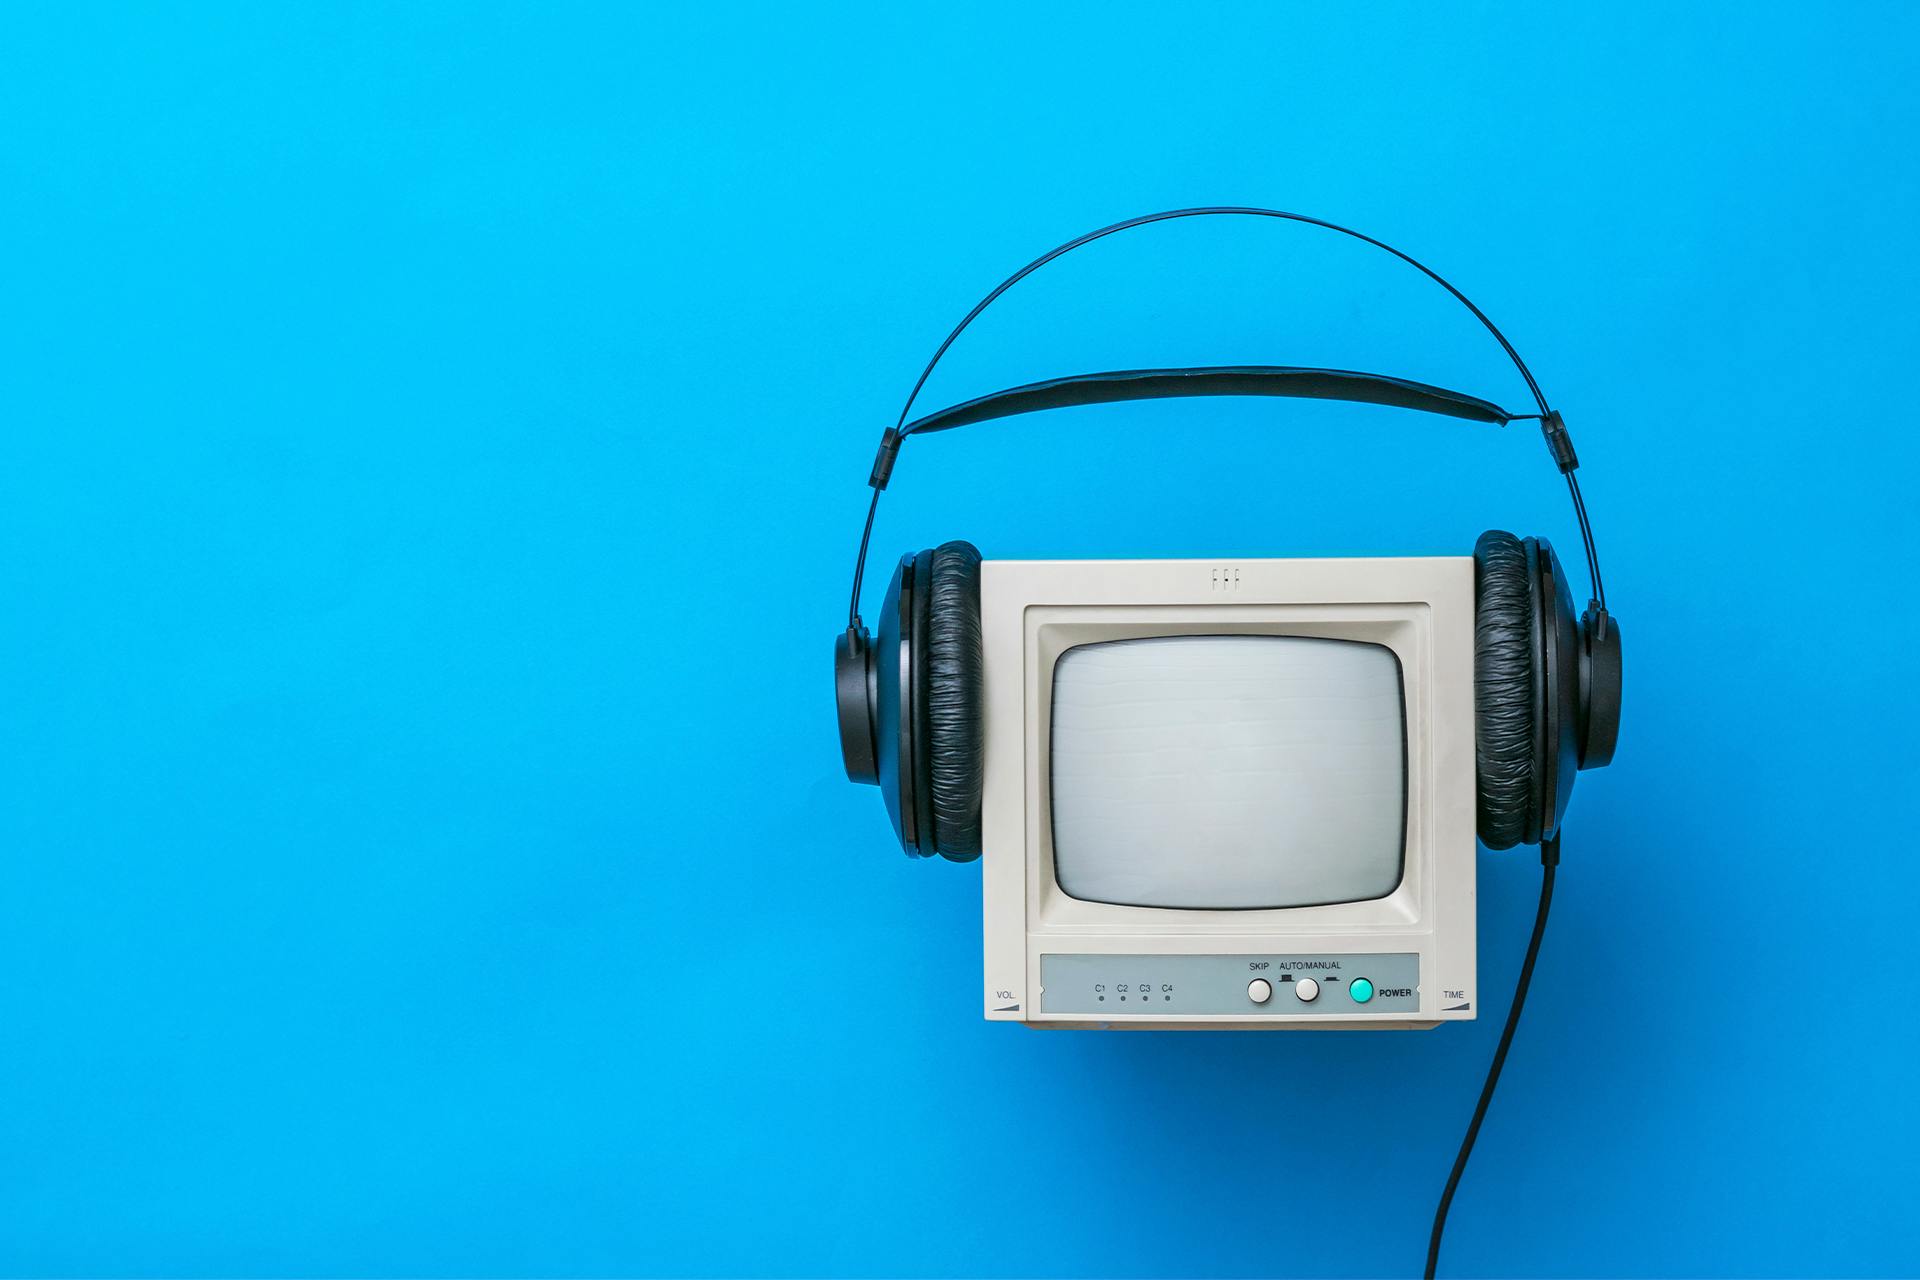 Old fashioned computer with headphones. Blog post: 14 proven PR KPIs that matter and how to track them